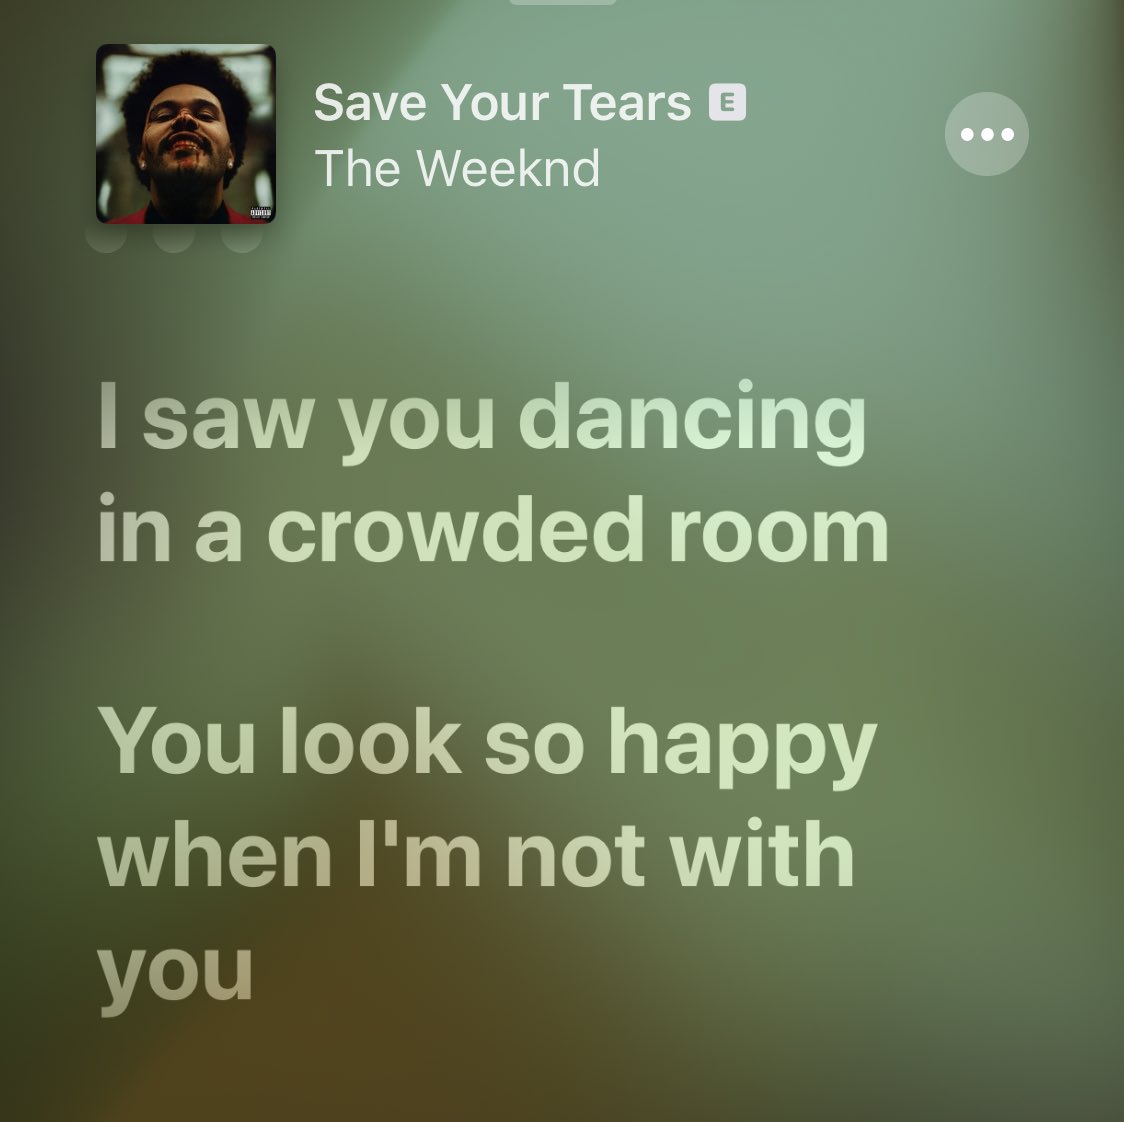 So as you’ve seen, Selena is in a “crowded room” where only one guy catches her eye across the room in the MV. Both Abel and Selena have referenced the terms “crowded room” in their music to indicate a potential connection between the two.